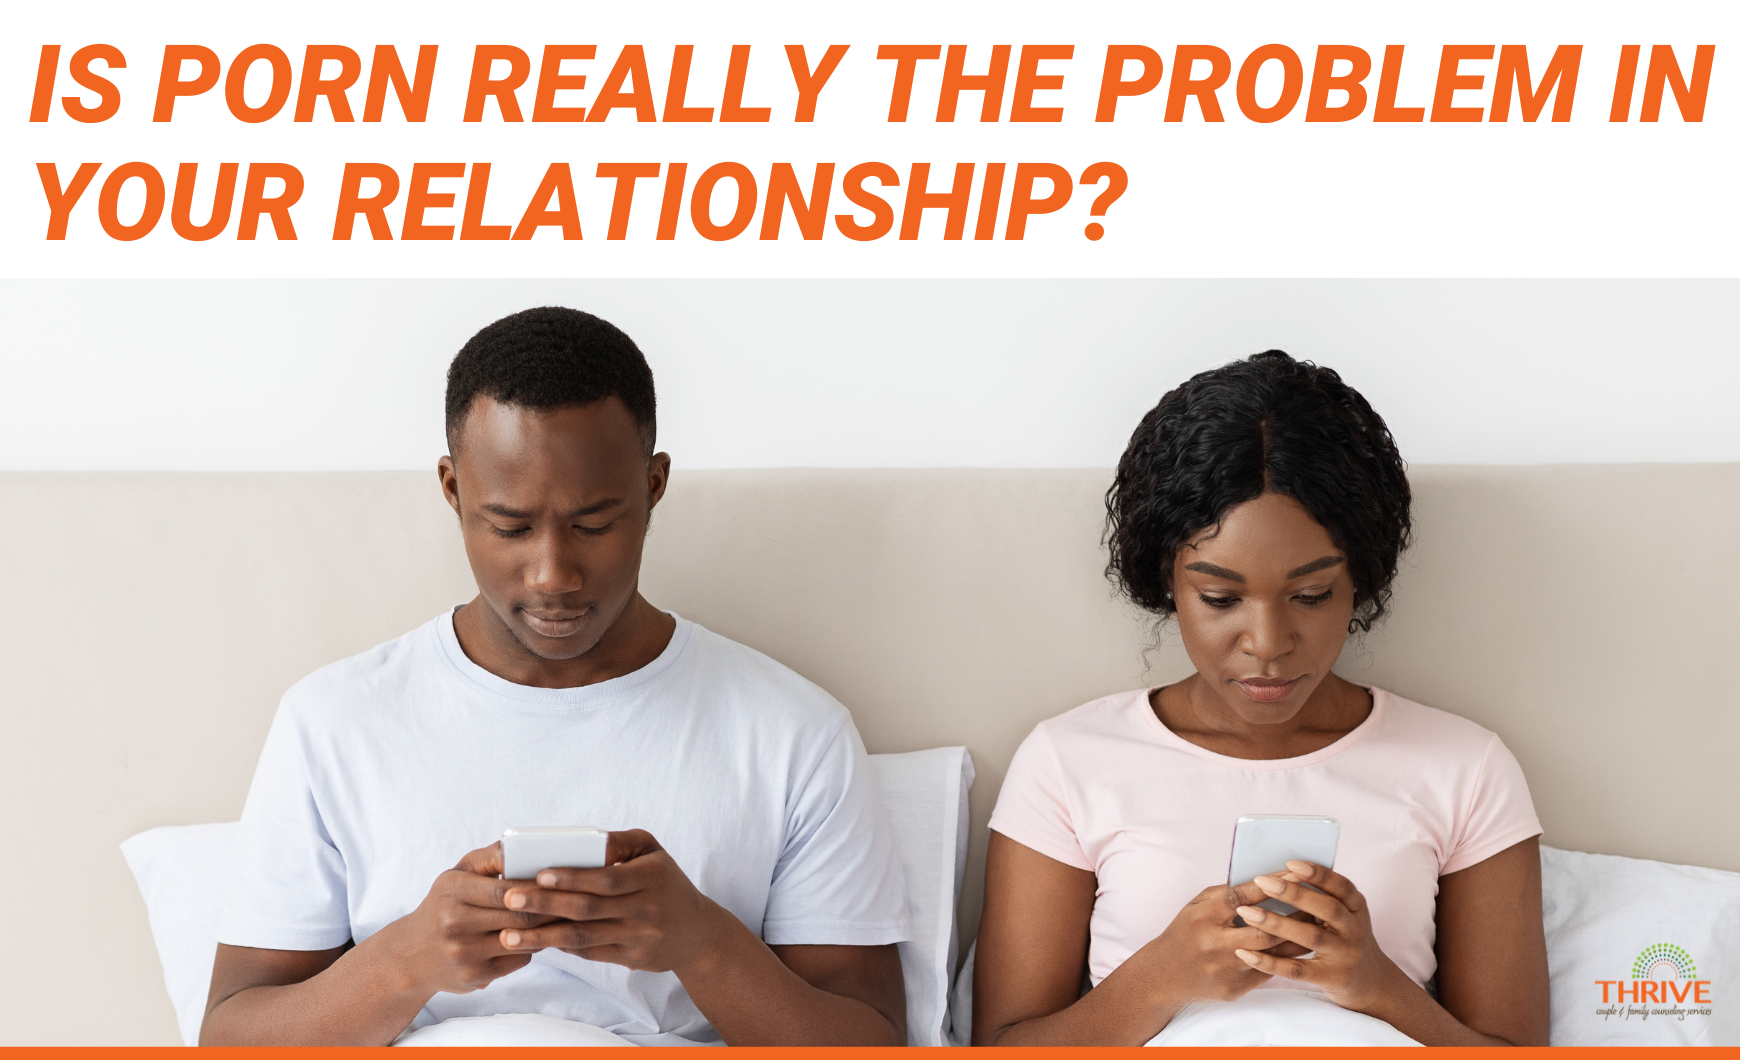 "Is Porn Really the Problem in Your Relationship" in dark orange text over a stock photo of a Black couple sitting up in a bed, both looking down at their phones.